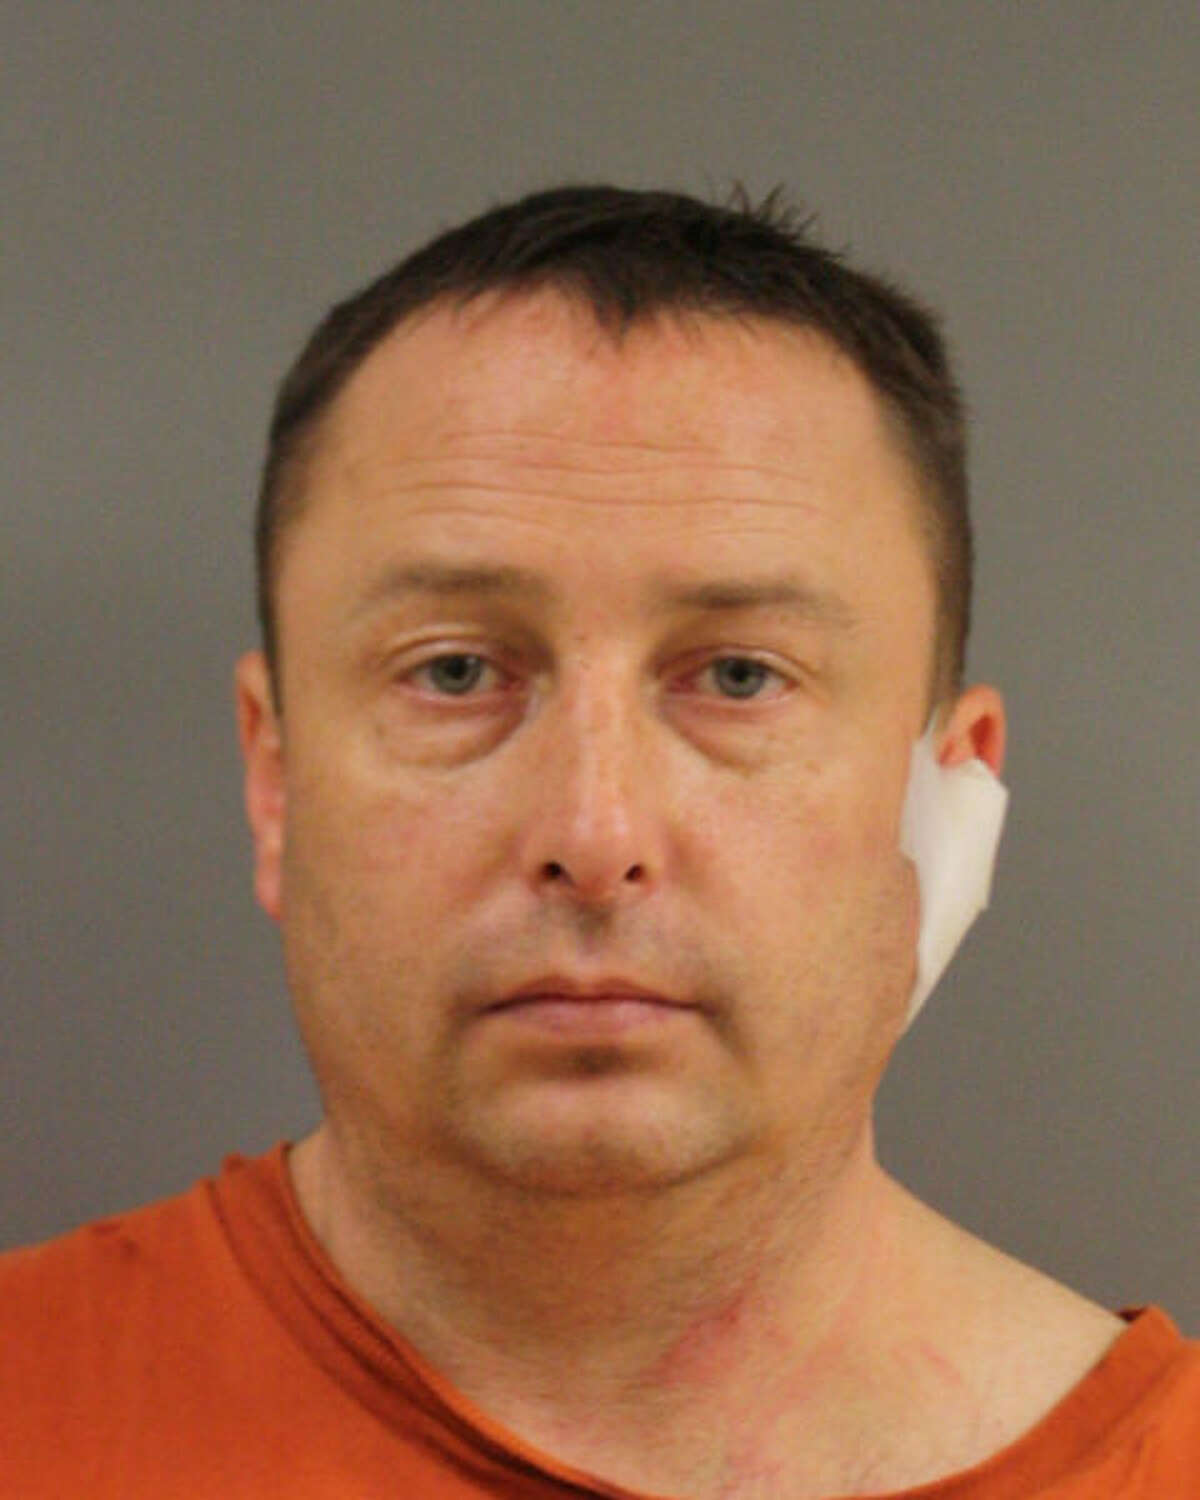 Thomas, 36, was arrested and charged with driving while intoxicated and failing to stop and render aid.